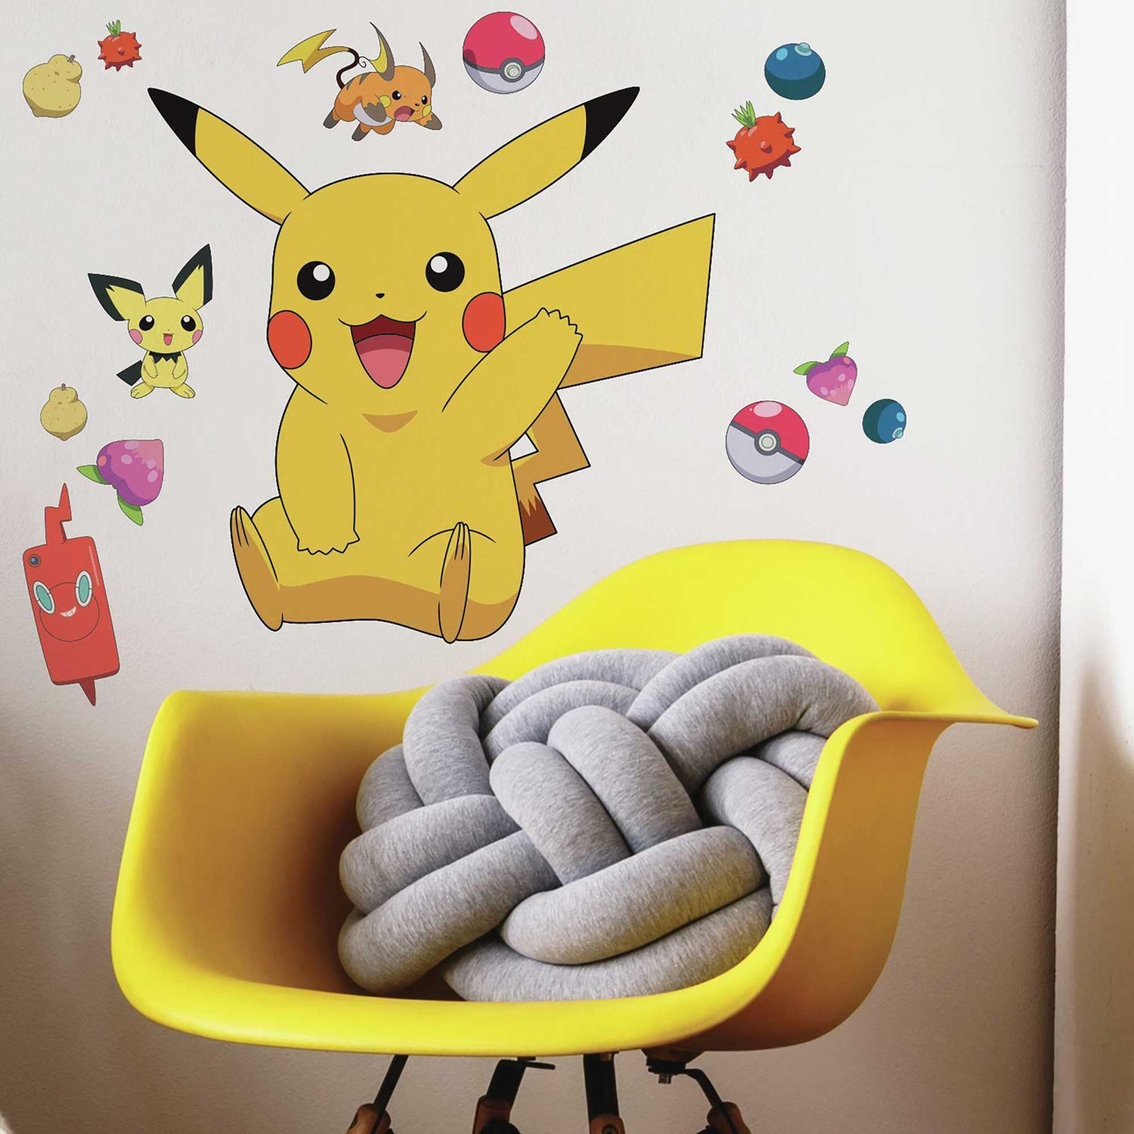 RoomMates Pikachu Peel and Stick Giant Wall Decals - Image 2 of 7